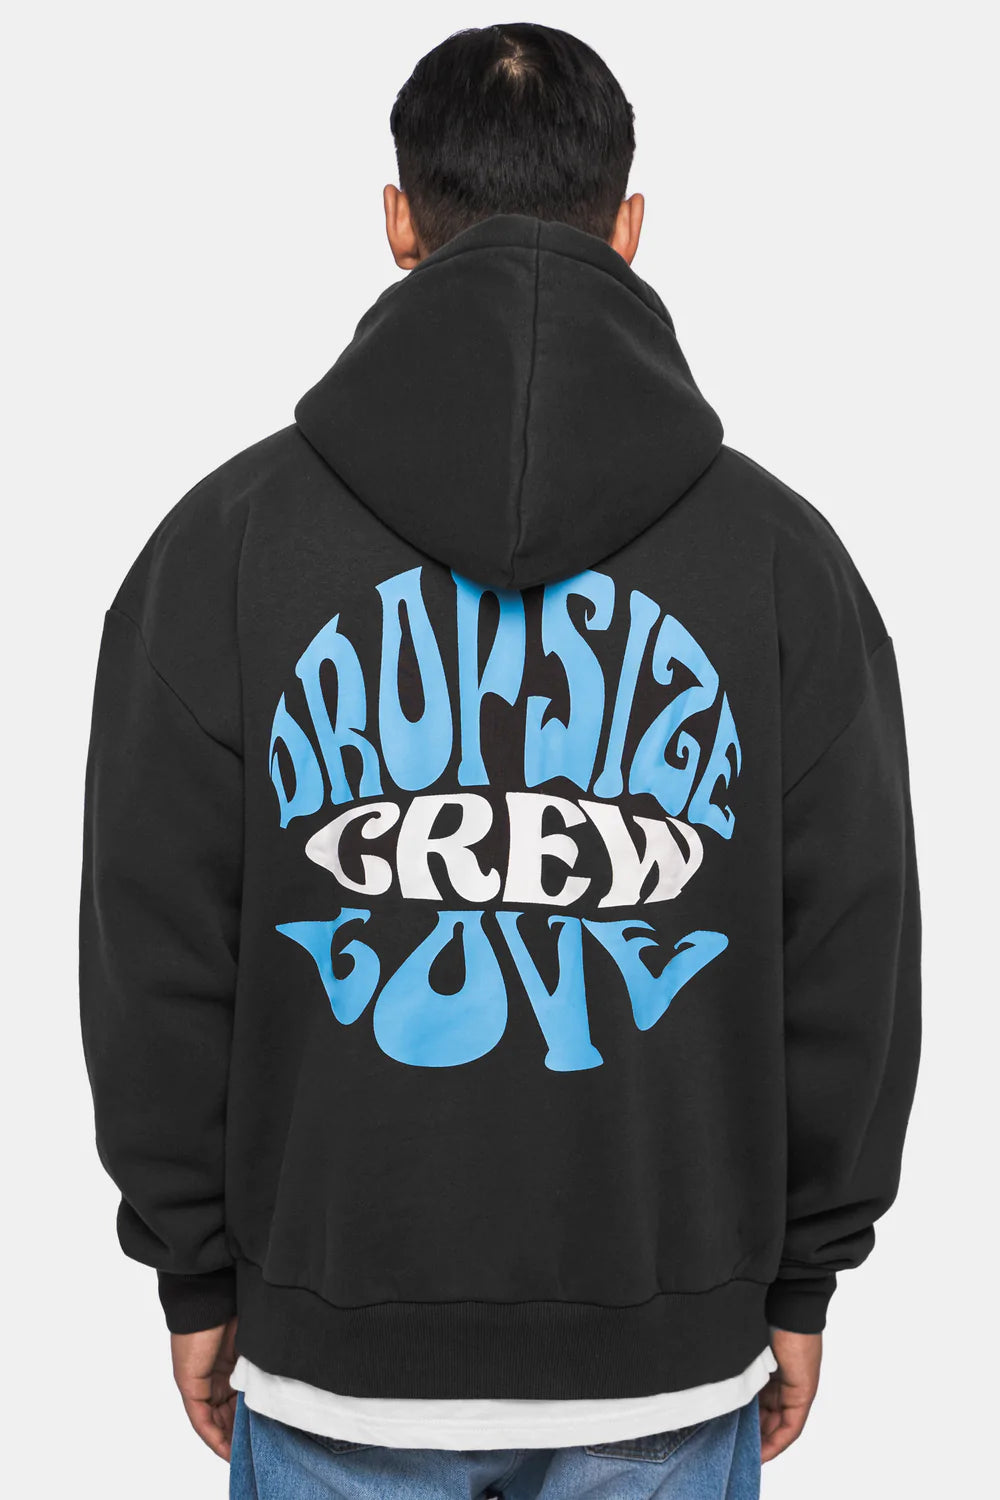 Dropsize Heavy Oversize Crew Love Hoodie Washed Black